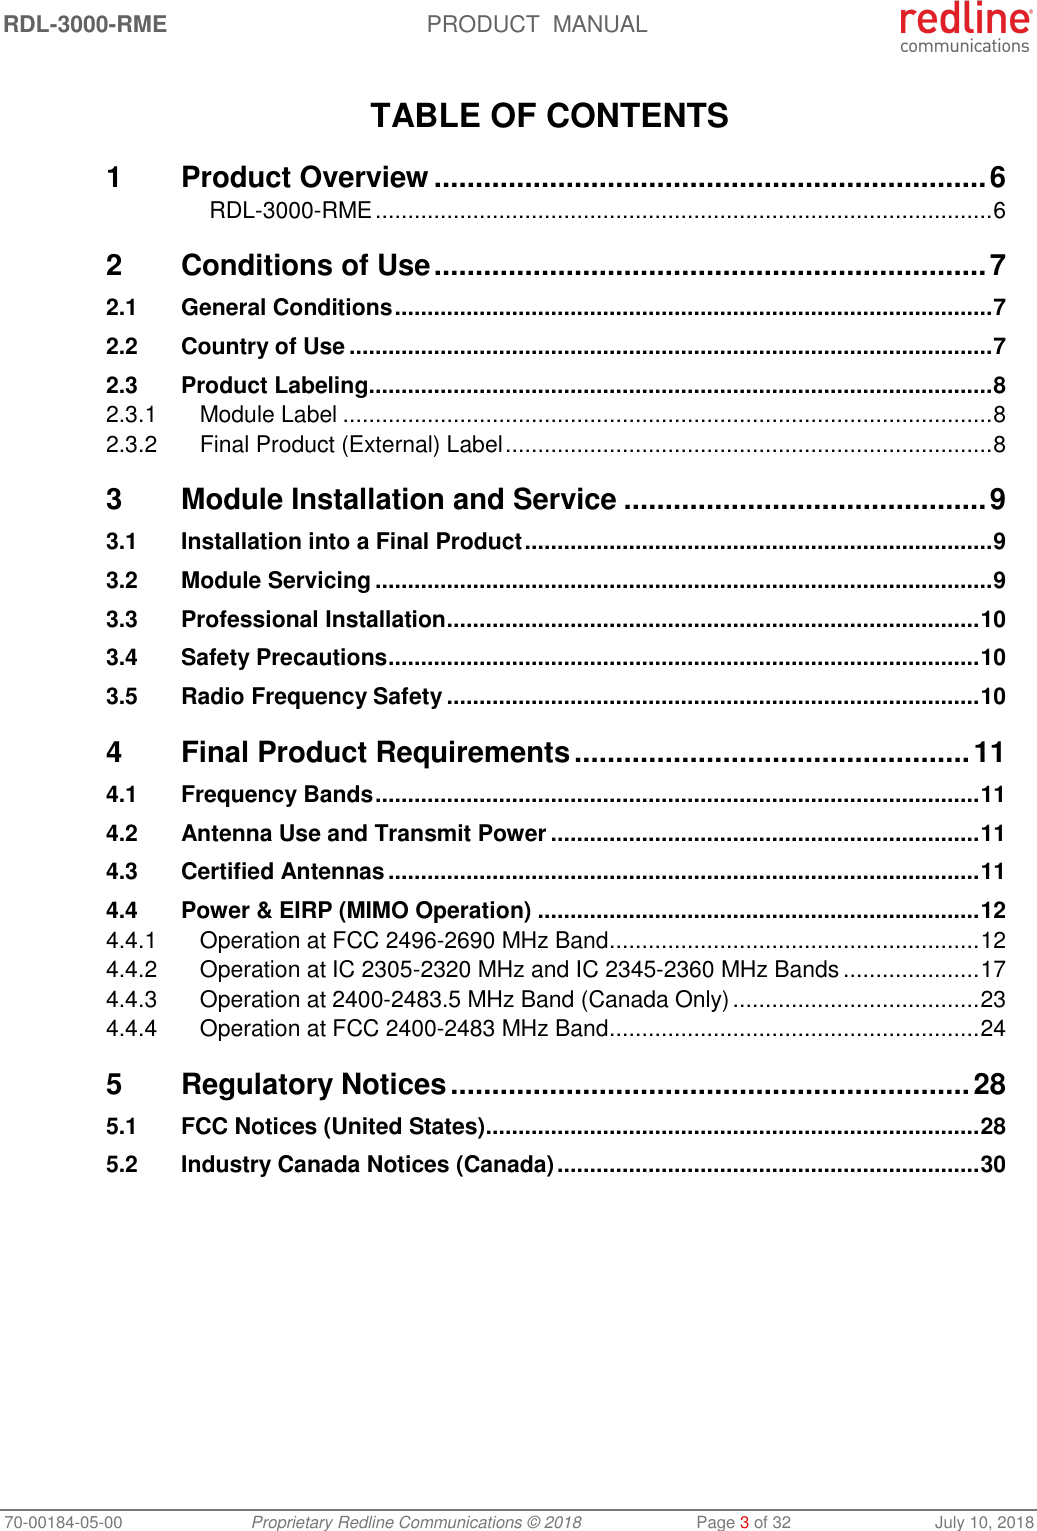 RDL-3000-RME  PRODUCT  MANUAL 70-00184-05-00 Proprietary Redline Communications © 2018  Page 3 of 32  July 10, 2018  TABLE OF CONTENTS 1 Product Overview ................................................................... 6 RDL-3000-RME ............................................................................................... 6 2 Conditions of Use ................................................................... 7 2.1 General Conditions ............................................................................................ 7 2.2 Country of Use ................................................................................................... 7 2.3 Product Labeling ................................................................................................ 8 2.3.1 Module Label .................................................................................................... 8 2.3.2 Final Product (External) Label ........................................................................... 8 3 Module Installation and Service ............................................ 9 3.1 Installation into a Final Product ........................................................................ 9 3.2 Module Servicing ............................................................................................... 9 3.3 Professional Installation .................................................................................. 10 3.4 Safety Precautions ........................................................................................... 10 3.5 Radio Frequency Safety .................................................................................. 10 4 Final Product Requirements ................................................ 11 4.1 Frequency Bands ............................................................................................. 11 4.2 Antenna Use and Transmit Power .................................................................. 11 4.3 Certified Antennas ........................................................................................... 11 4.4 Power &amp; EIRP (MIMO Operation) .................................................................... 12 4.4.1 Operation at FCC 2496-2690 MHz Band ......................................................... 12 4.4.2 Operation at IC 2305-2320 MHz and IC 2345-2360 MHz Bands ..................... 17 4.4.3 Operation at 2400-2483.5 MHz Band (Canada Only) ...................................... 23 4.4.4 Operation at FCC 2400-2483 MHz Band ......................................................... 24 5 Regulatory Notices ............................................................... 28 5.1 FCC Notices (United States) ............................................................................ 28 5.2 Industry Canada Notices (Canada) ................................................................. 30   